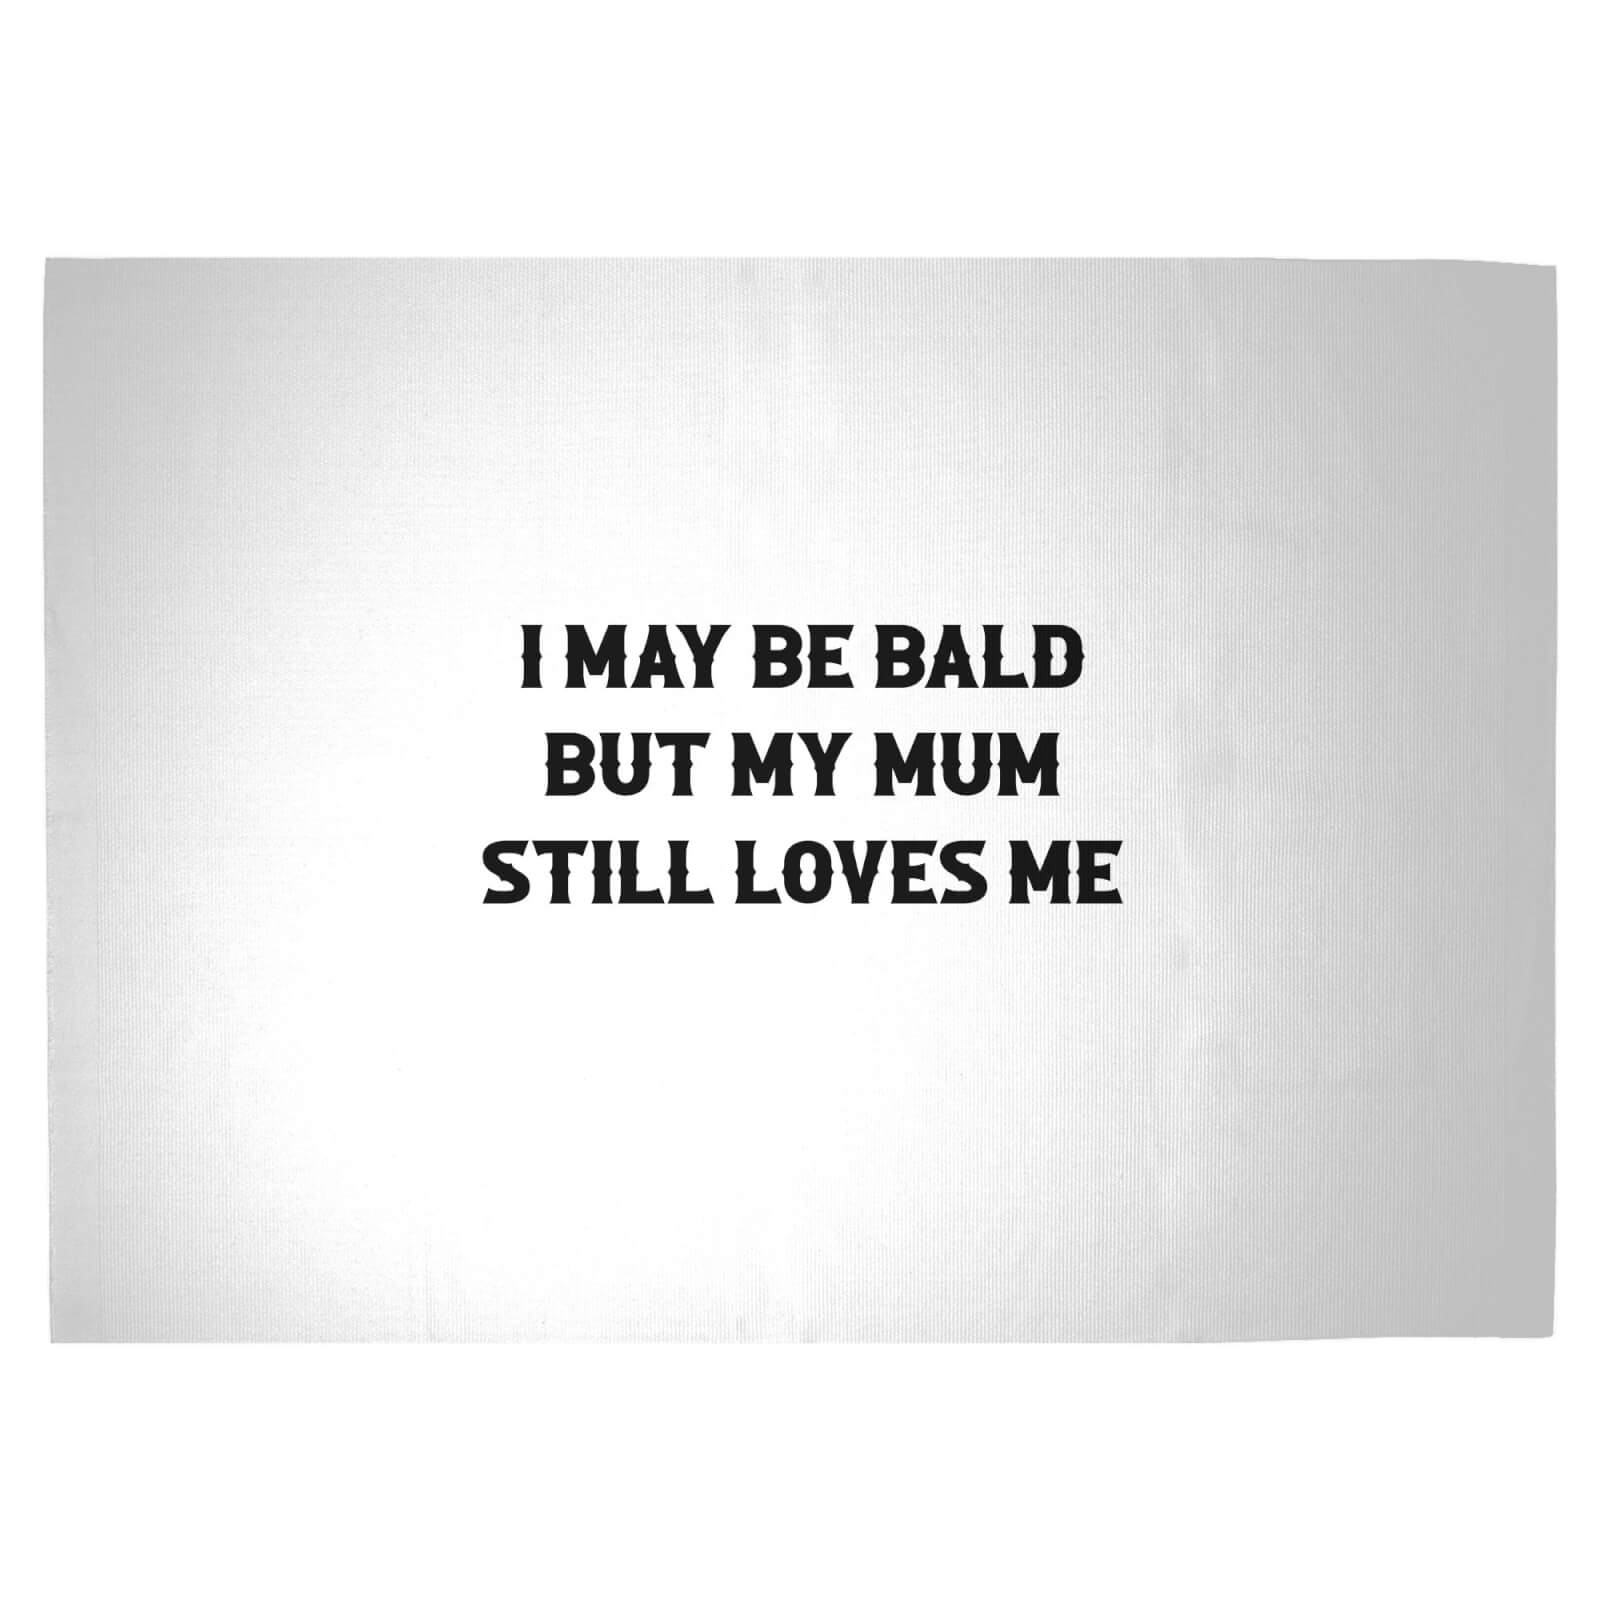 I May Be Bald But My Mum Still Loves Me Woven Rug - Large